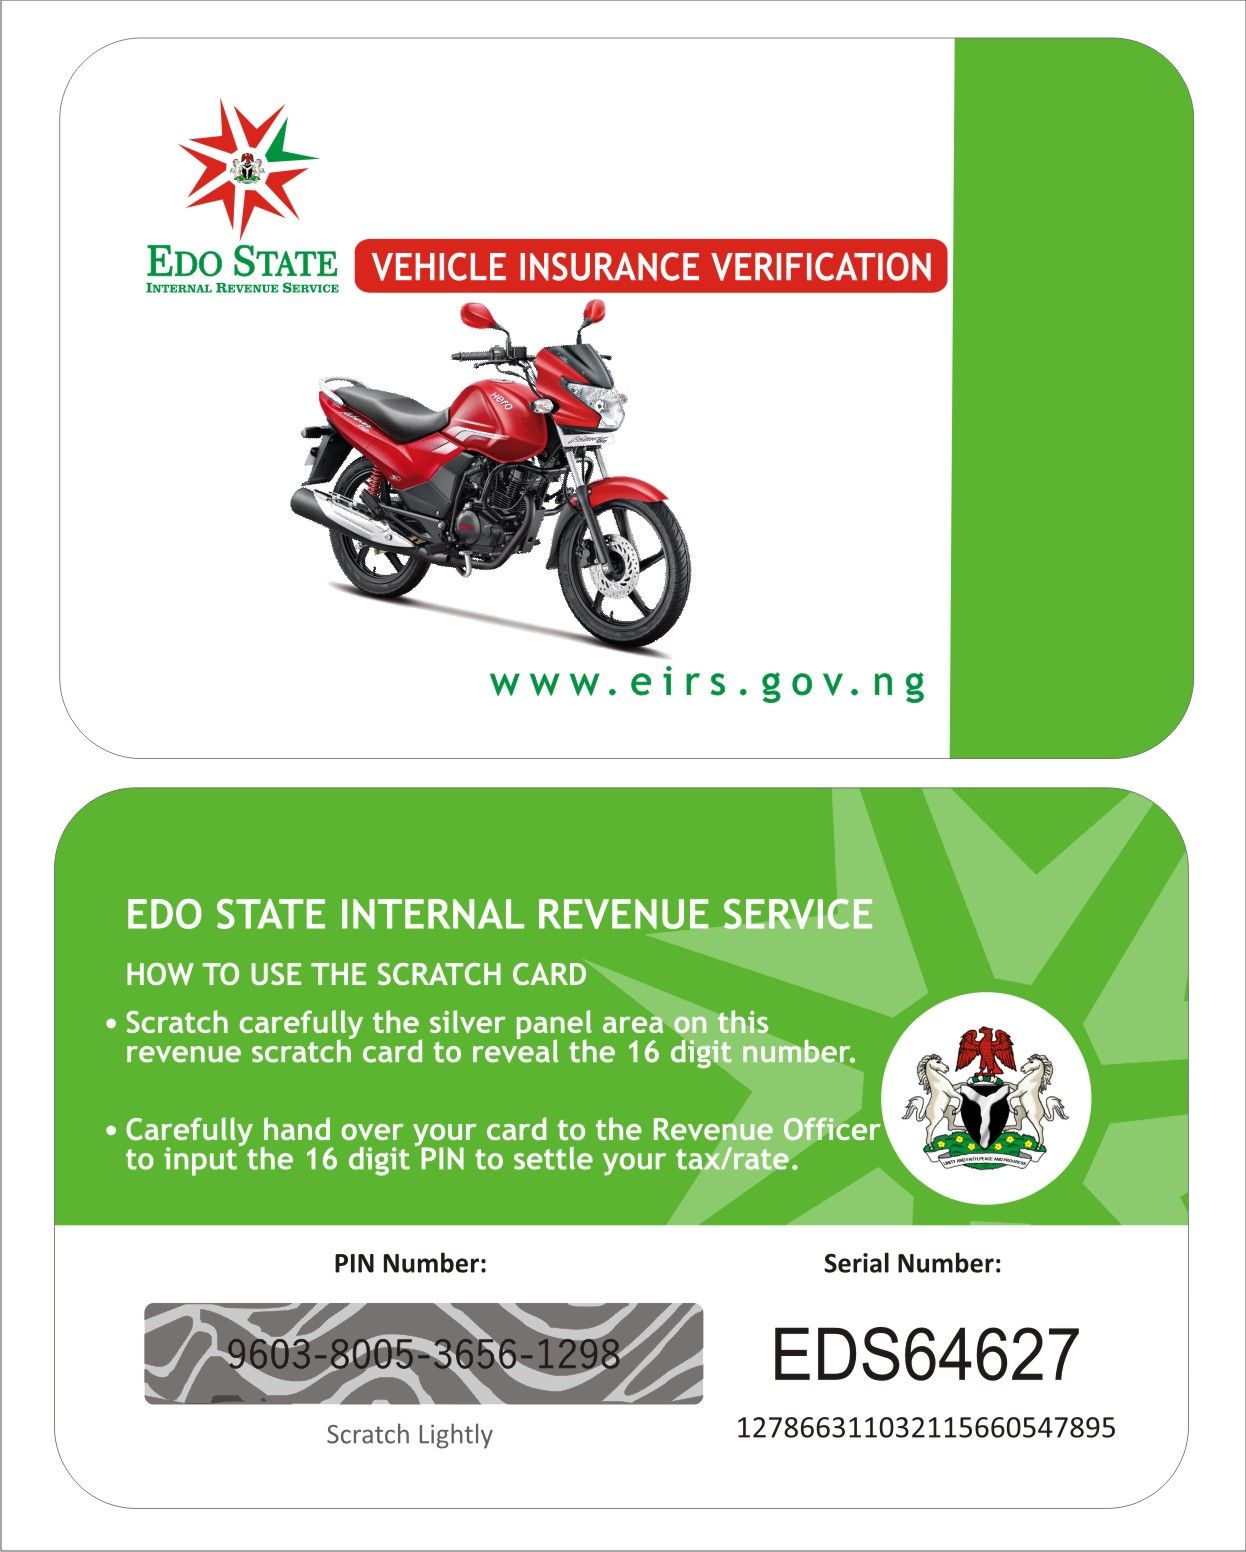 CALL CHINEDU ON 08179651585 TO PRINT PORTAL ACCESS SCRATCH CARDS